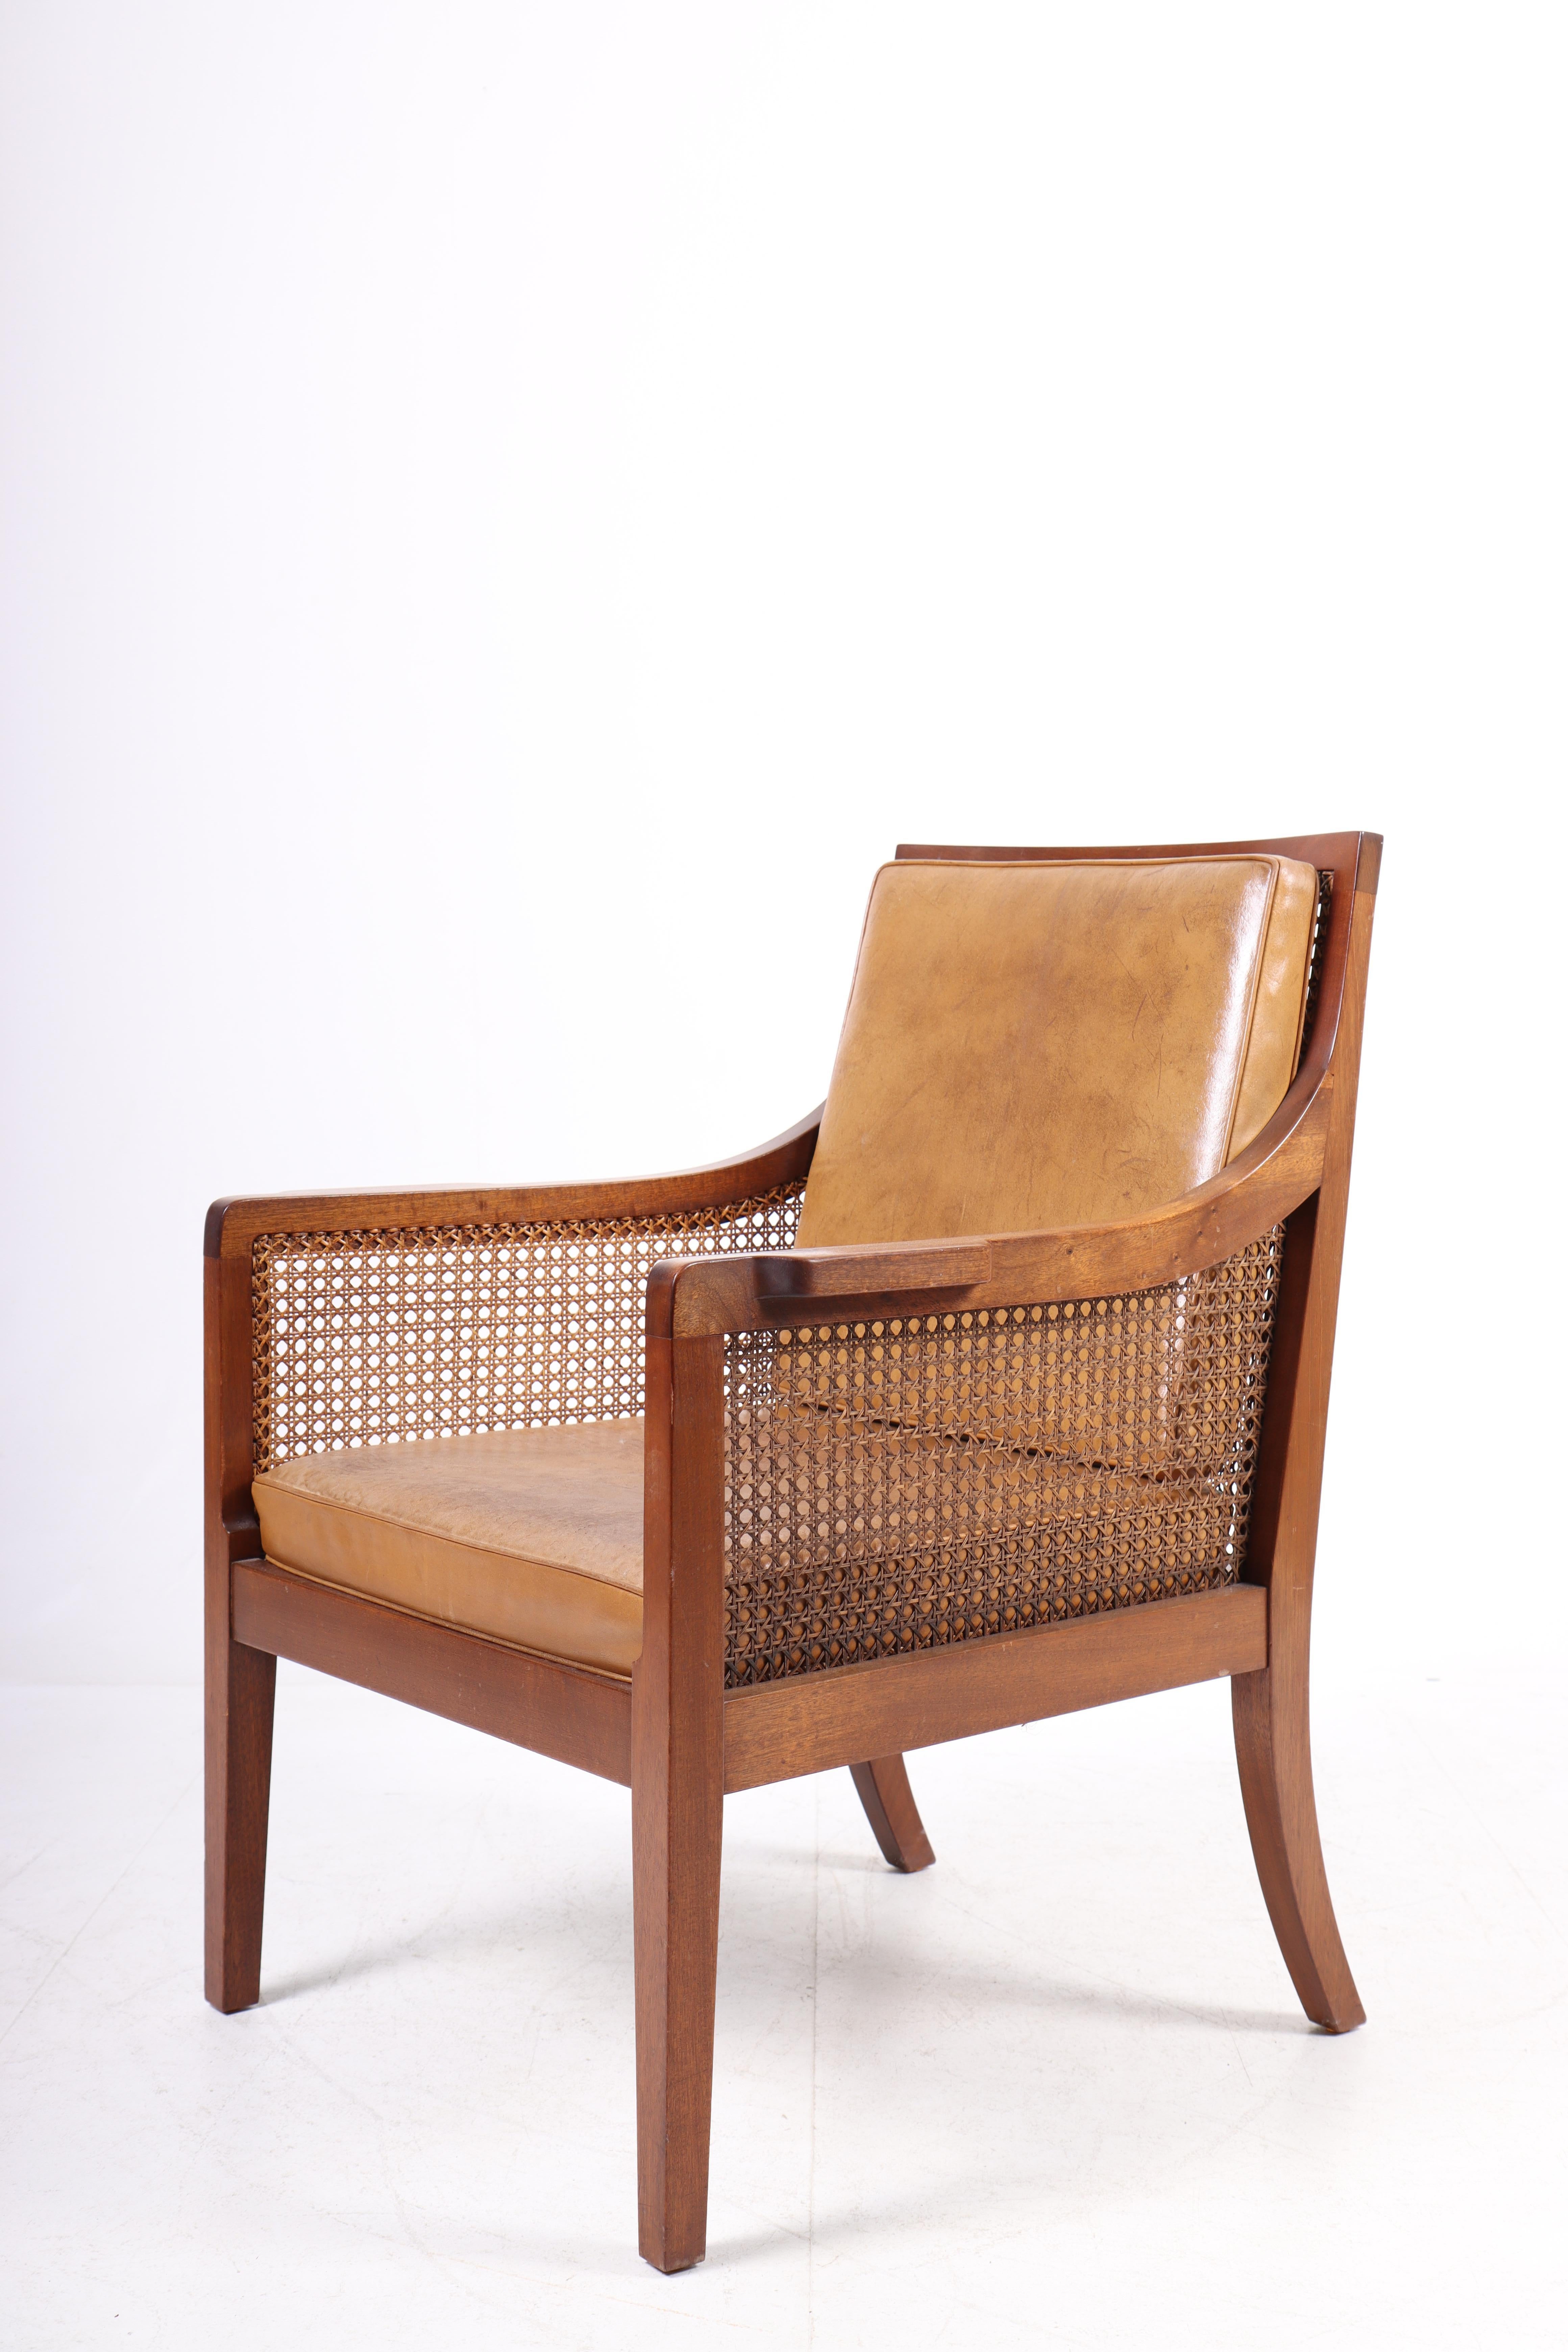 Mid-Century Modern Classic Lounge Chair in Mahogany and French Cane, Made in Denmark 1940s